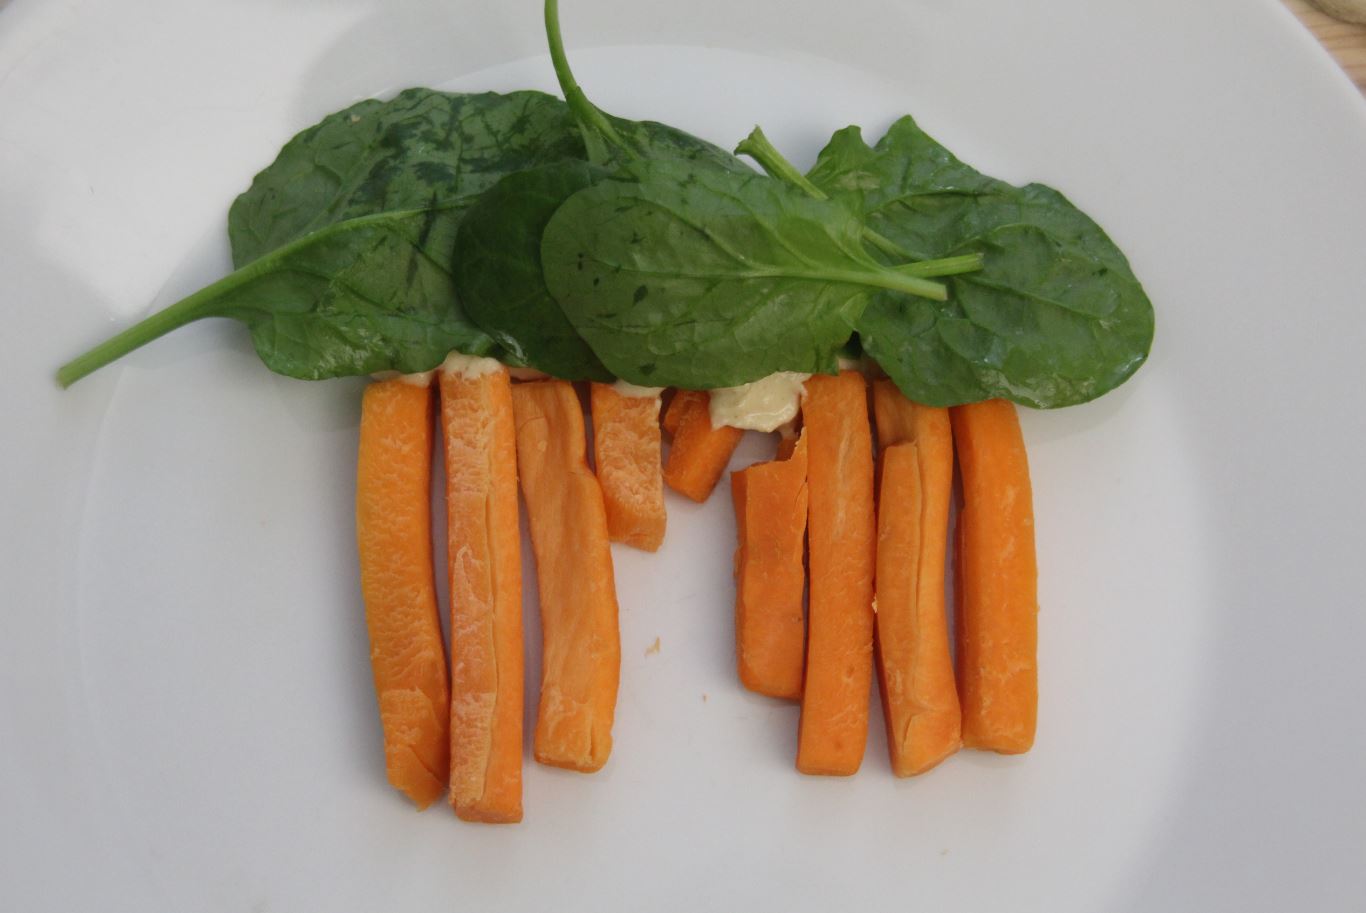 Art activity for sukot - plate showing suka model from carrots and spinach leaves.